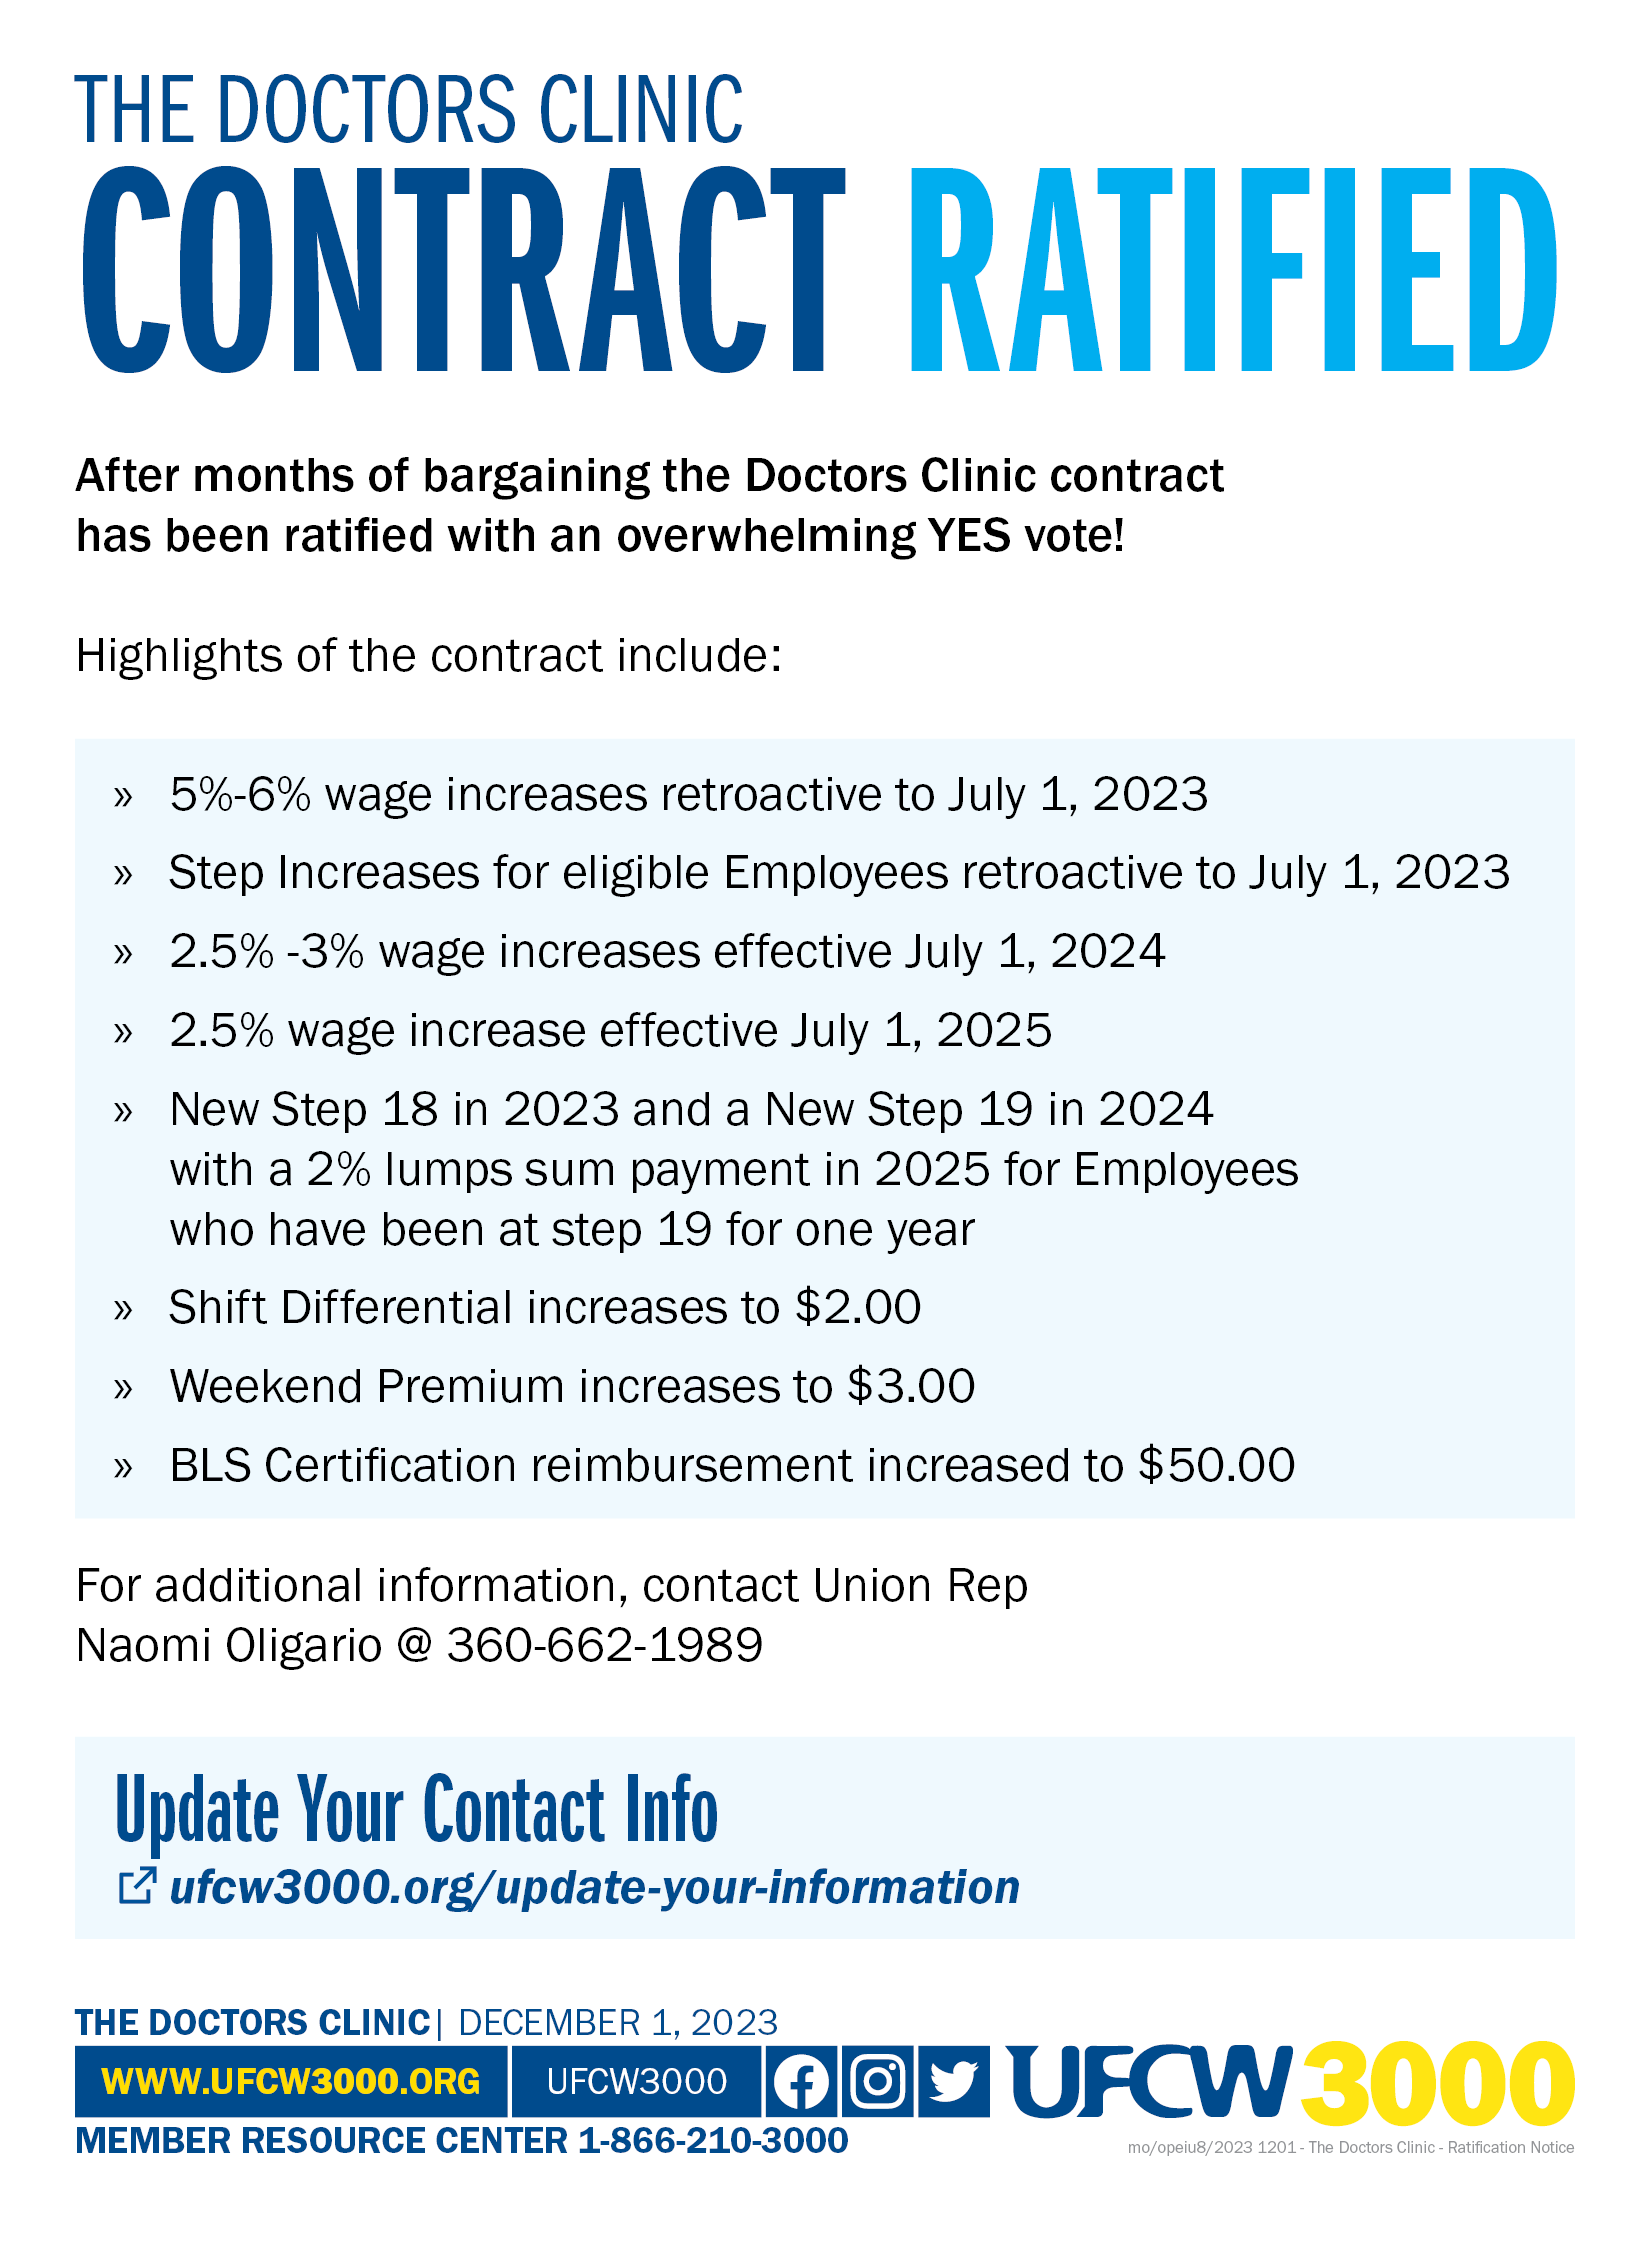 The Doctors Clinic - Contract Ratified — UFCW 3000